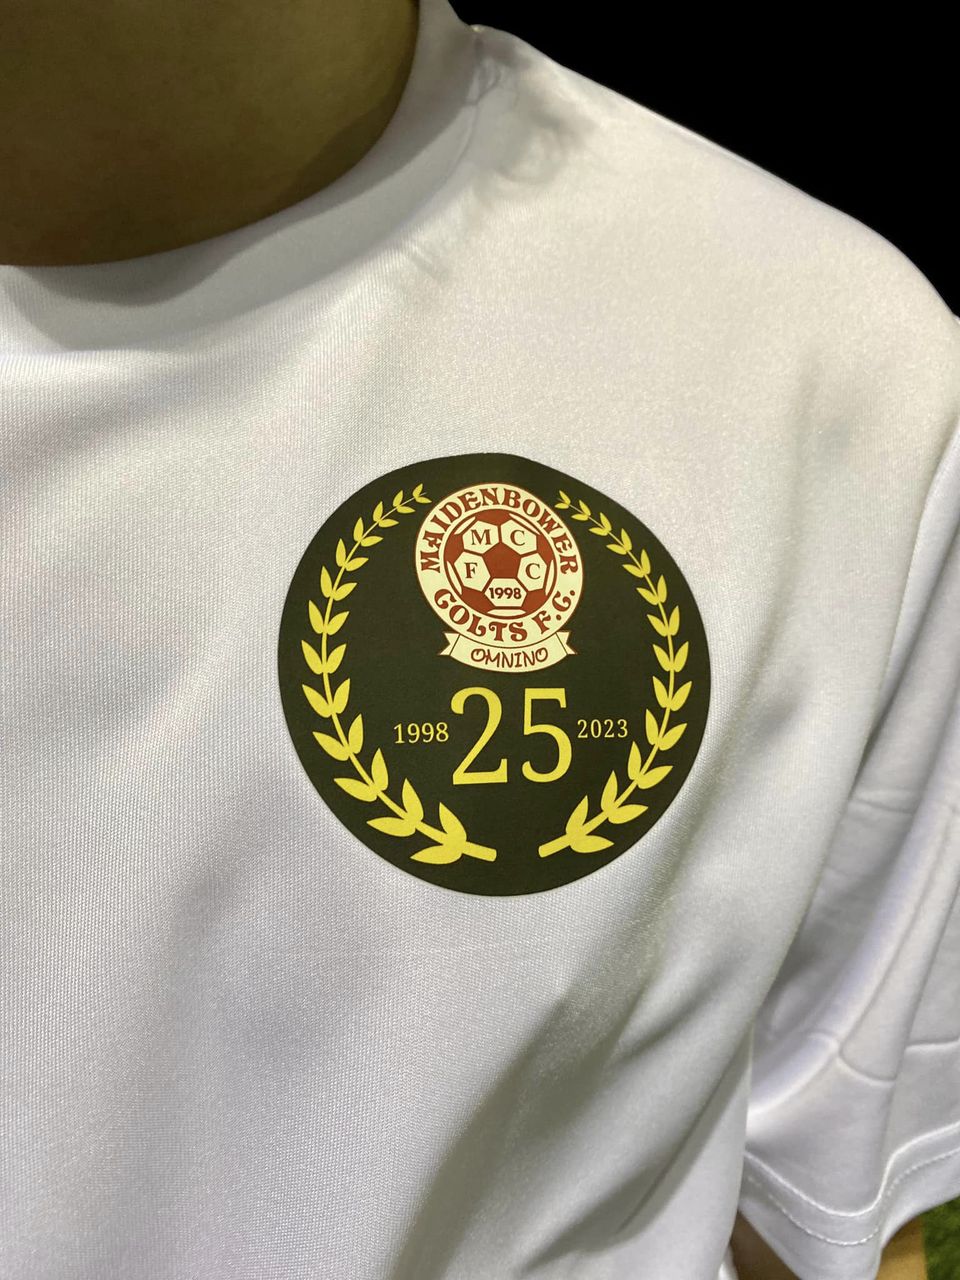 Special edition 25th Anniversary training top